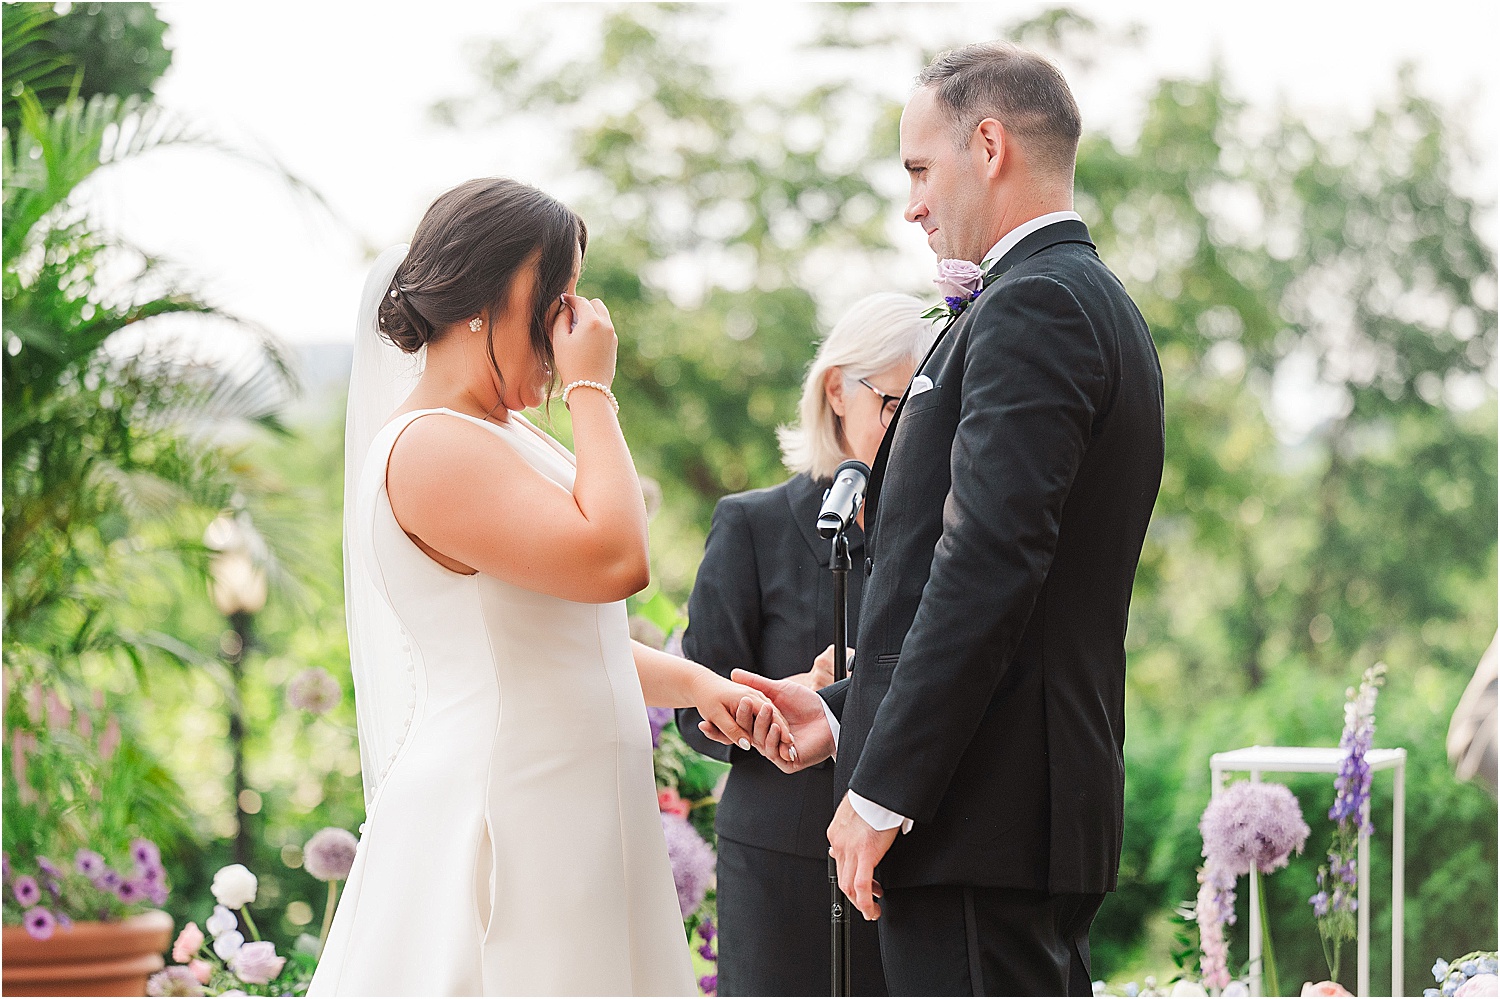 bride crying during wedding ceremony • Wild Weather - Love at a Phipps Conservatory Outdoor Garden Wedding